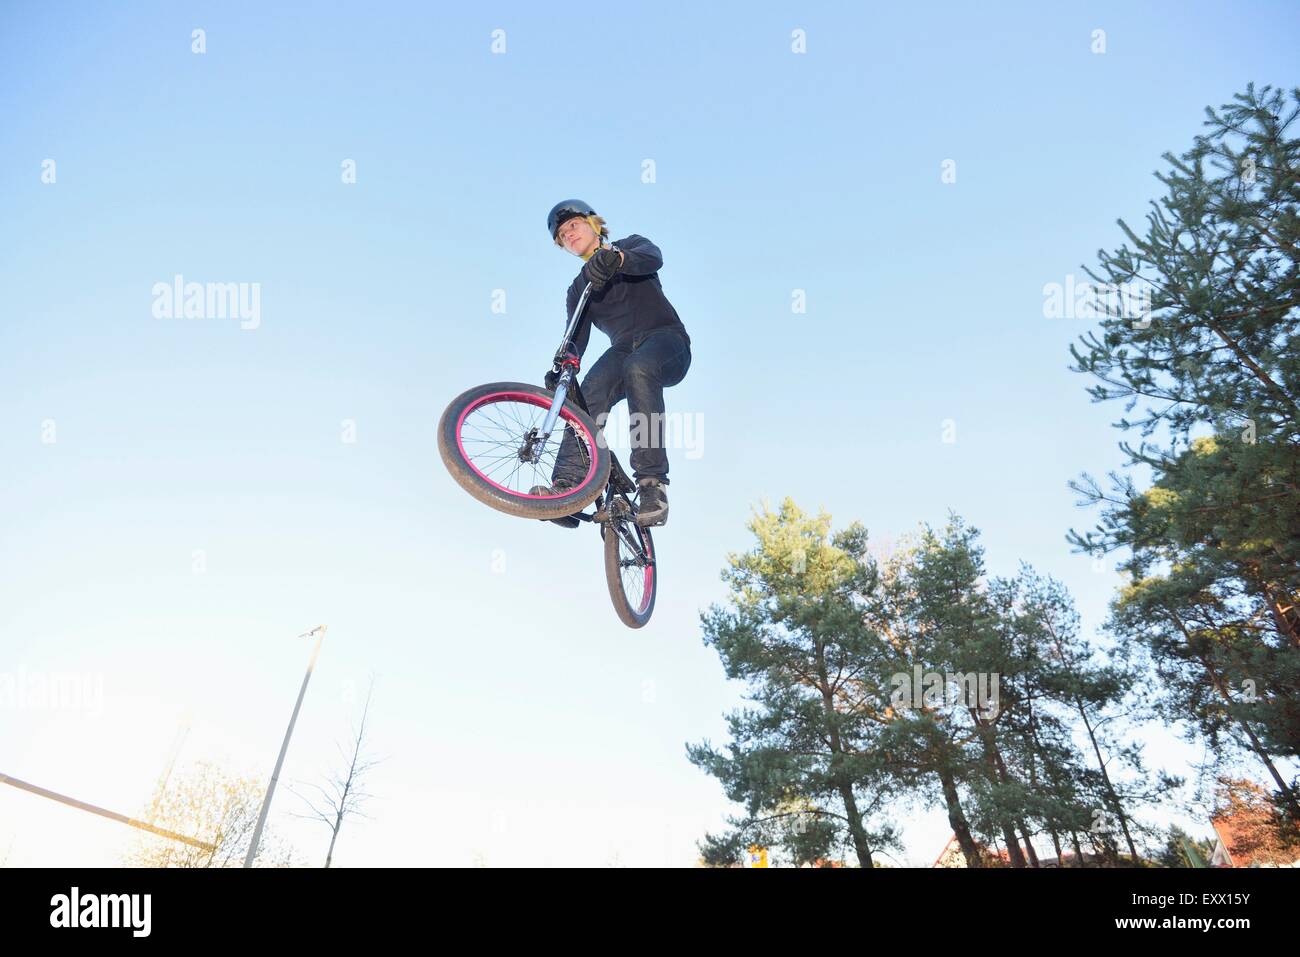 Teenager jumping in the air with his bmx bike Stock Photo